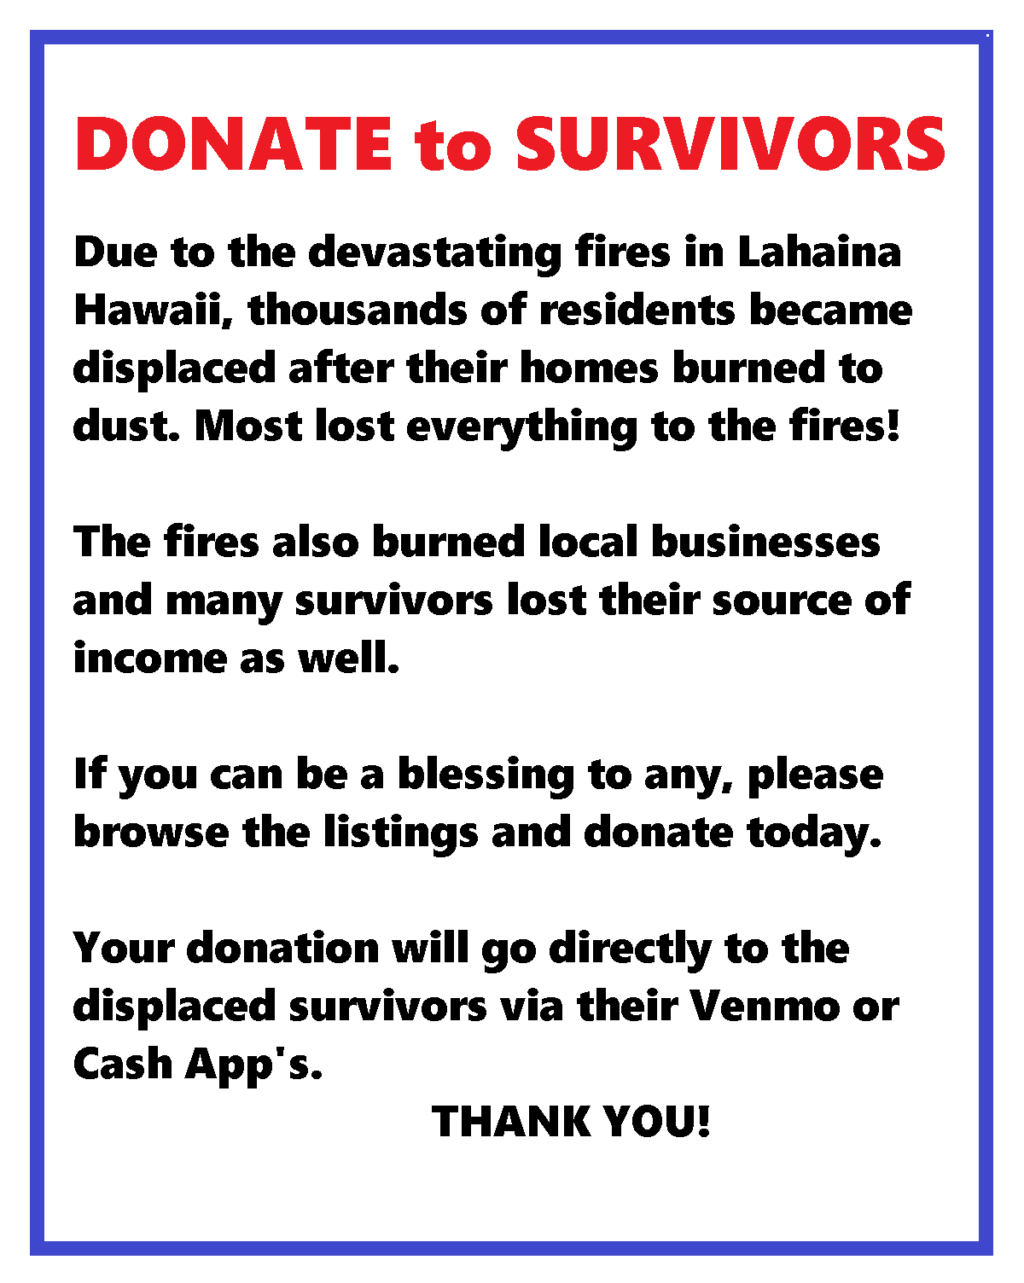 Donate to Survivors of the Lahaina Fires